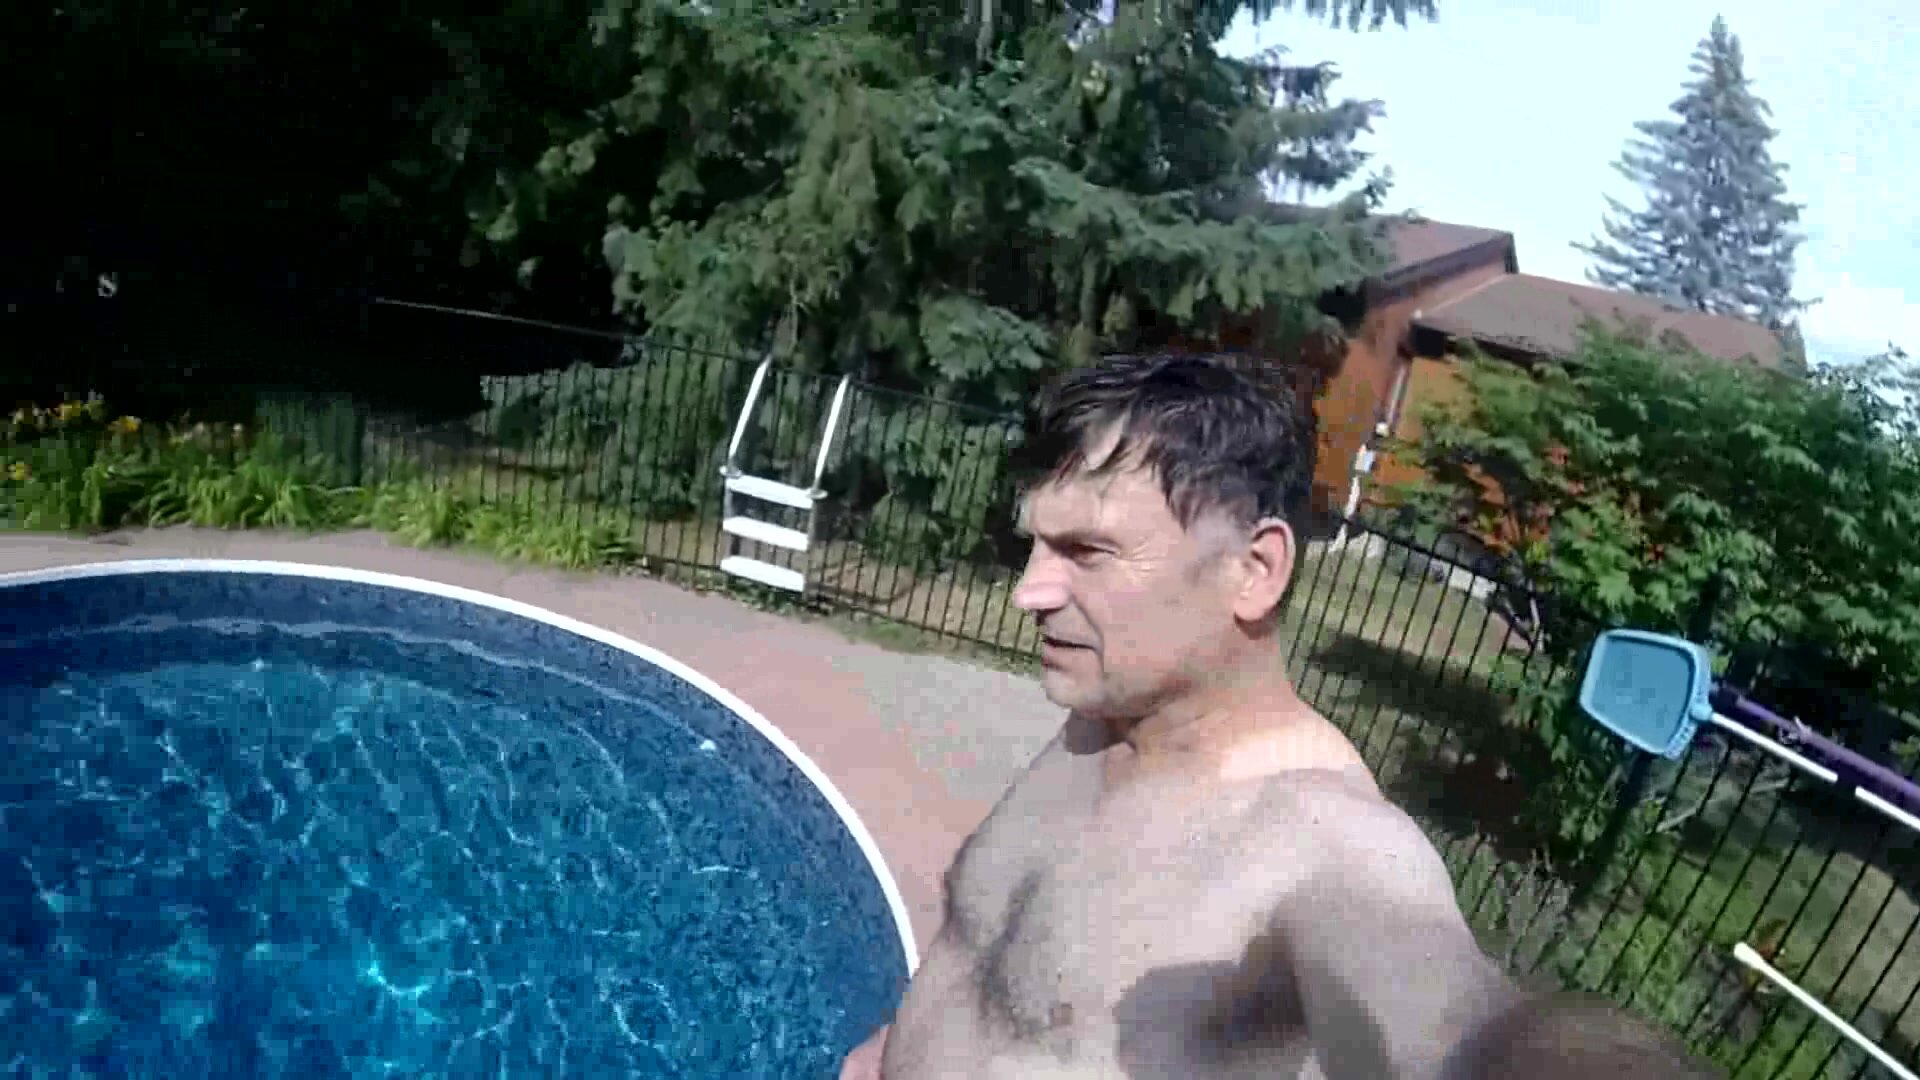 Mature man barefaced underwater in pool